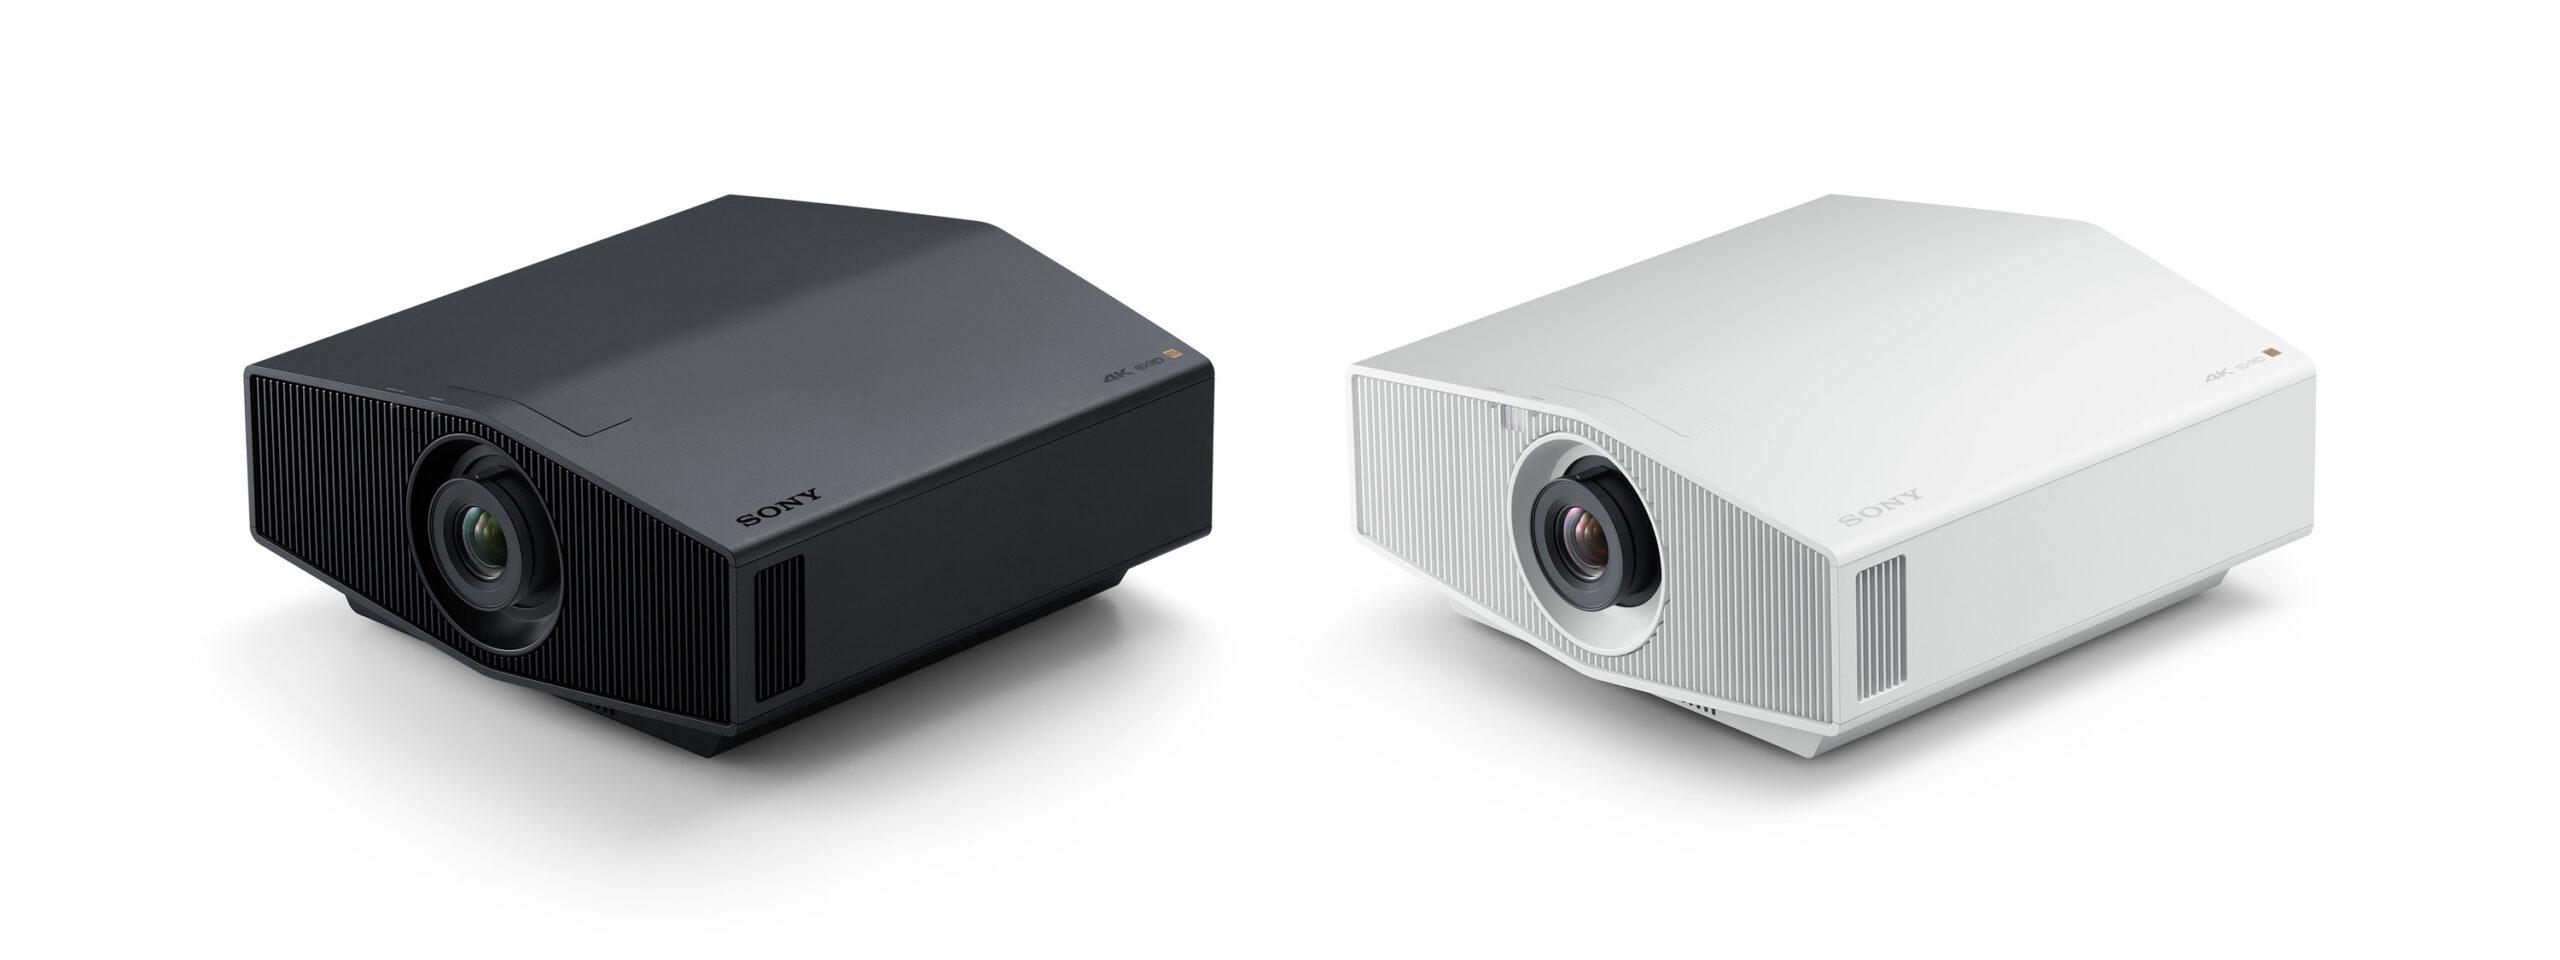 This is no mere annual refresh. Sony's three new home theater projectors are a generational leap forward. 0d6c322e vplxw5000 others 220201 015 large scaled